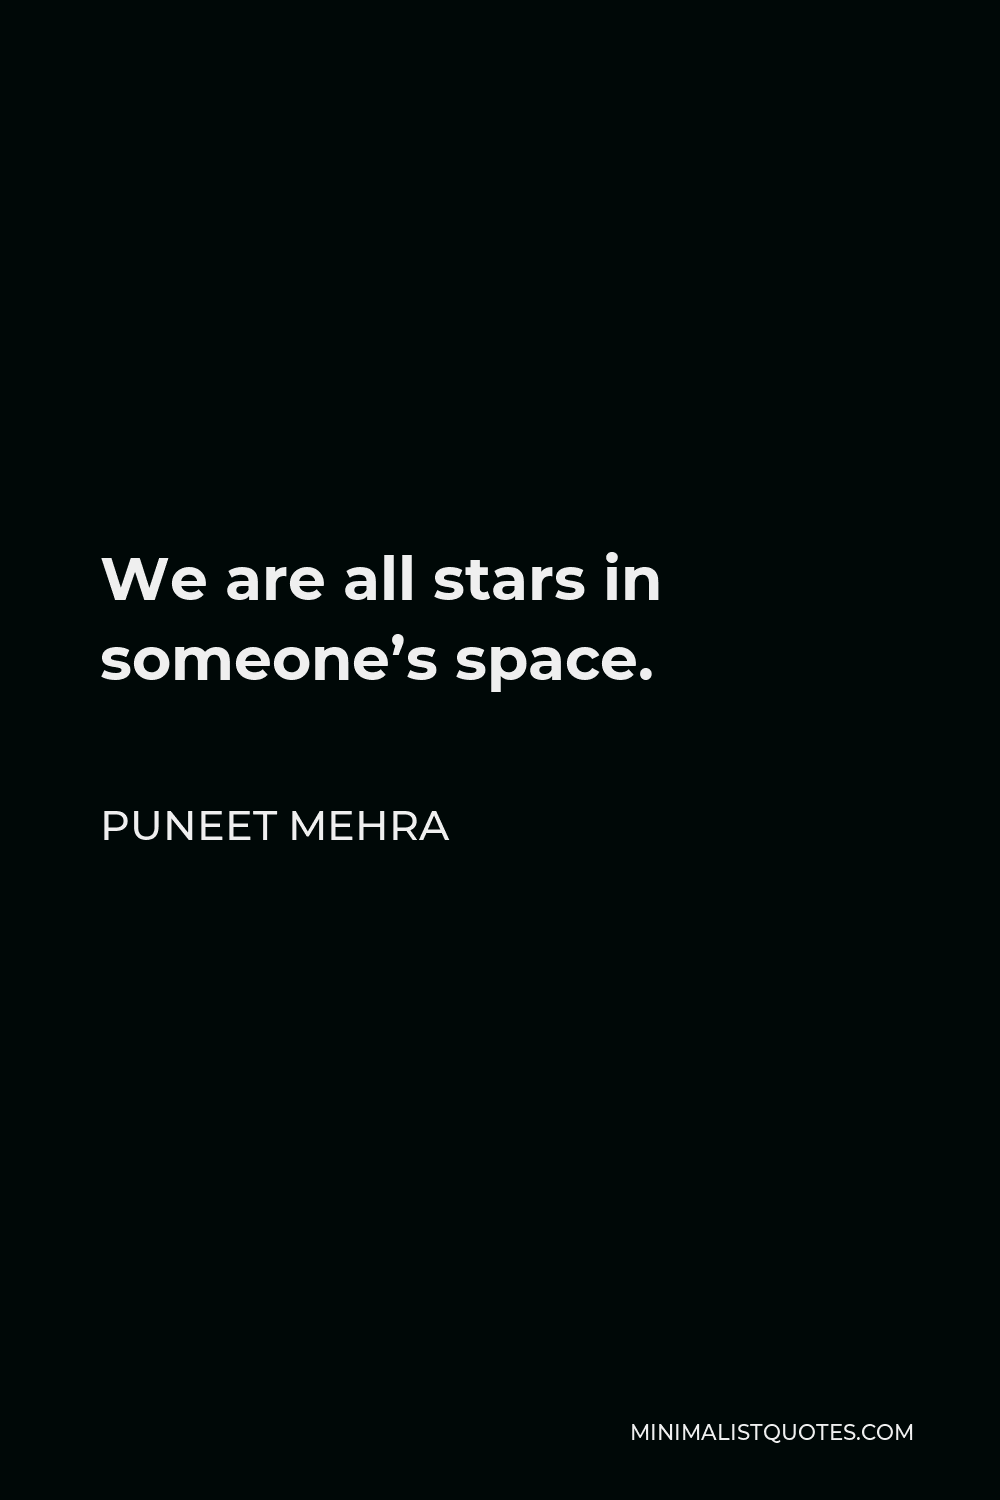 Puneet Mehra Quote - We are all stars in someone’s space.